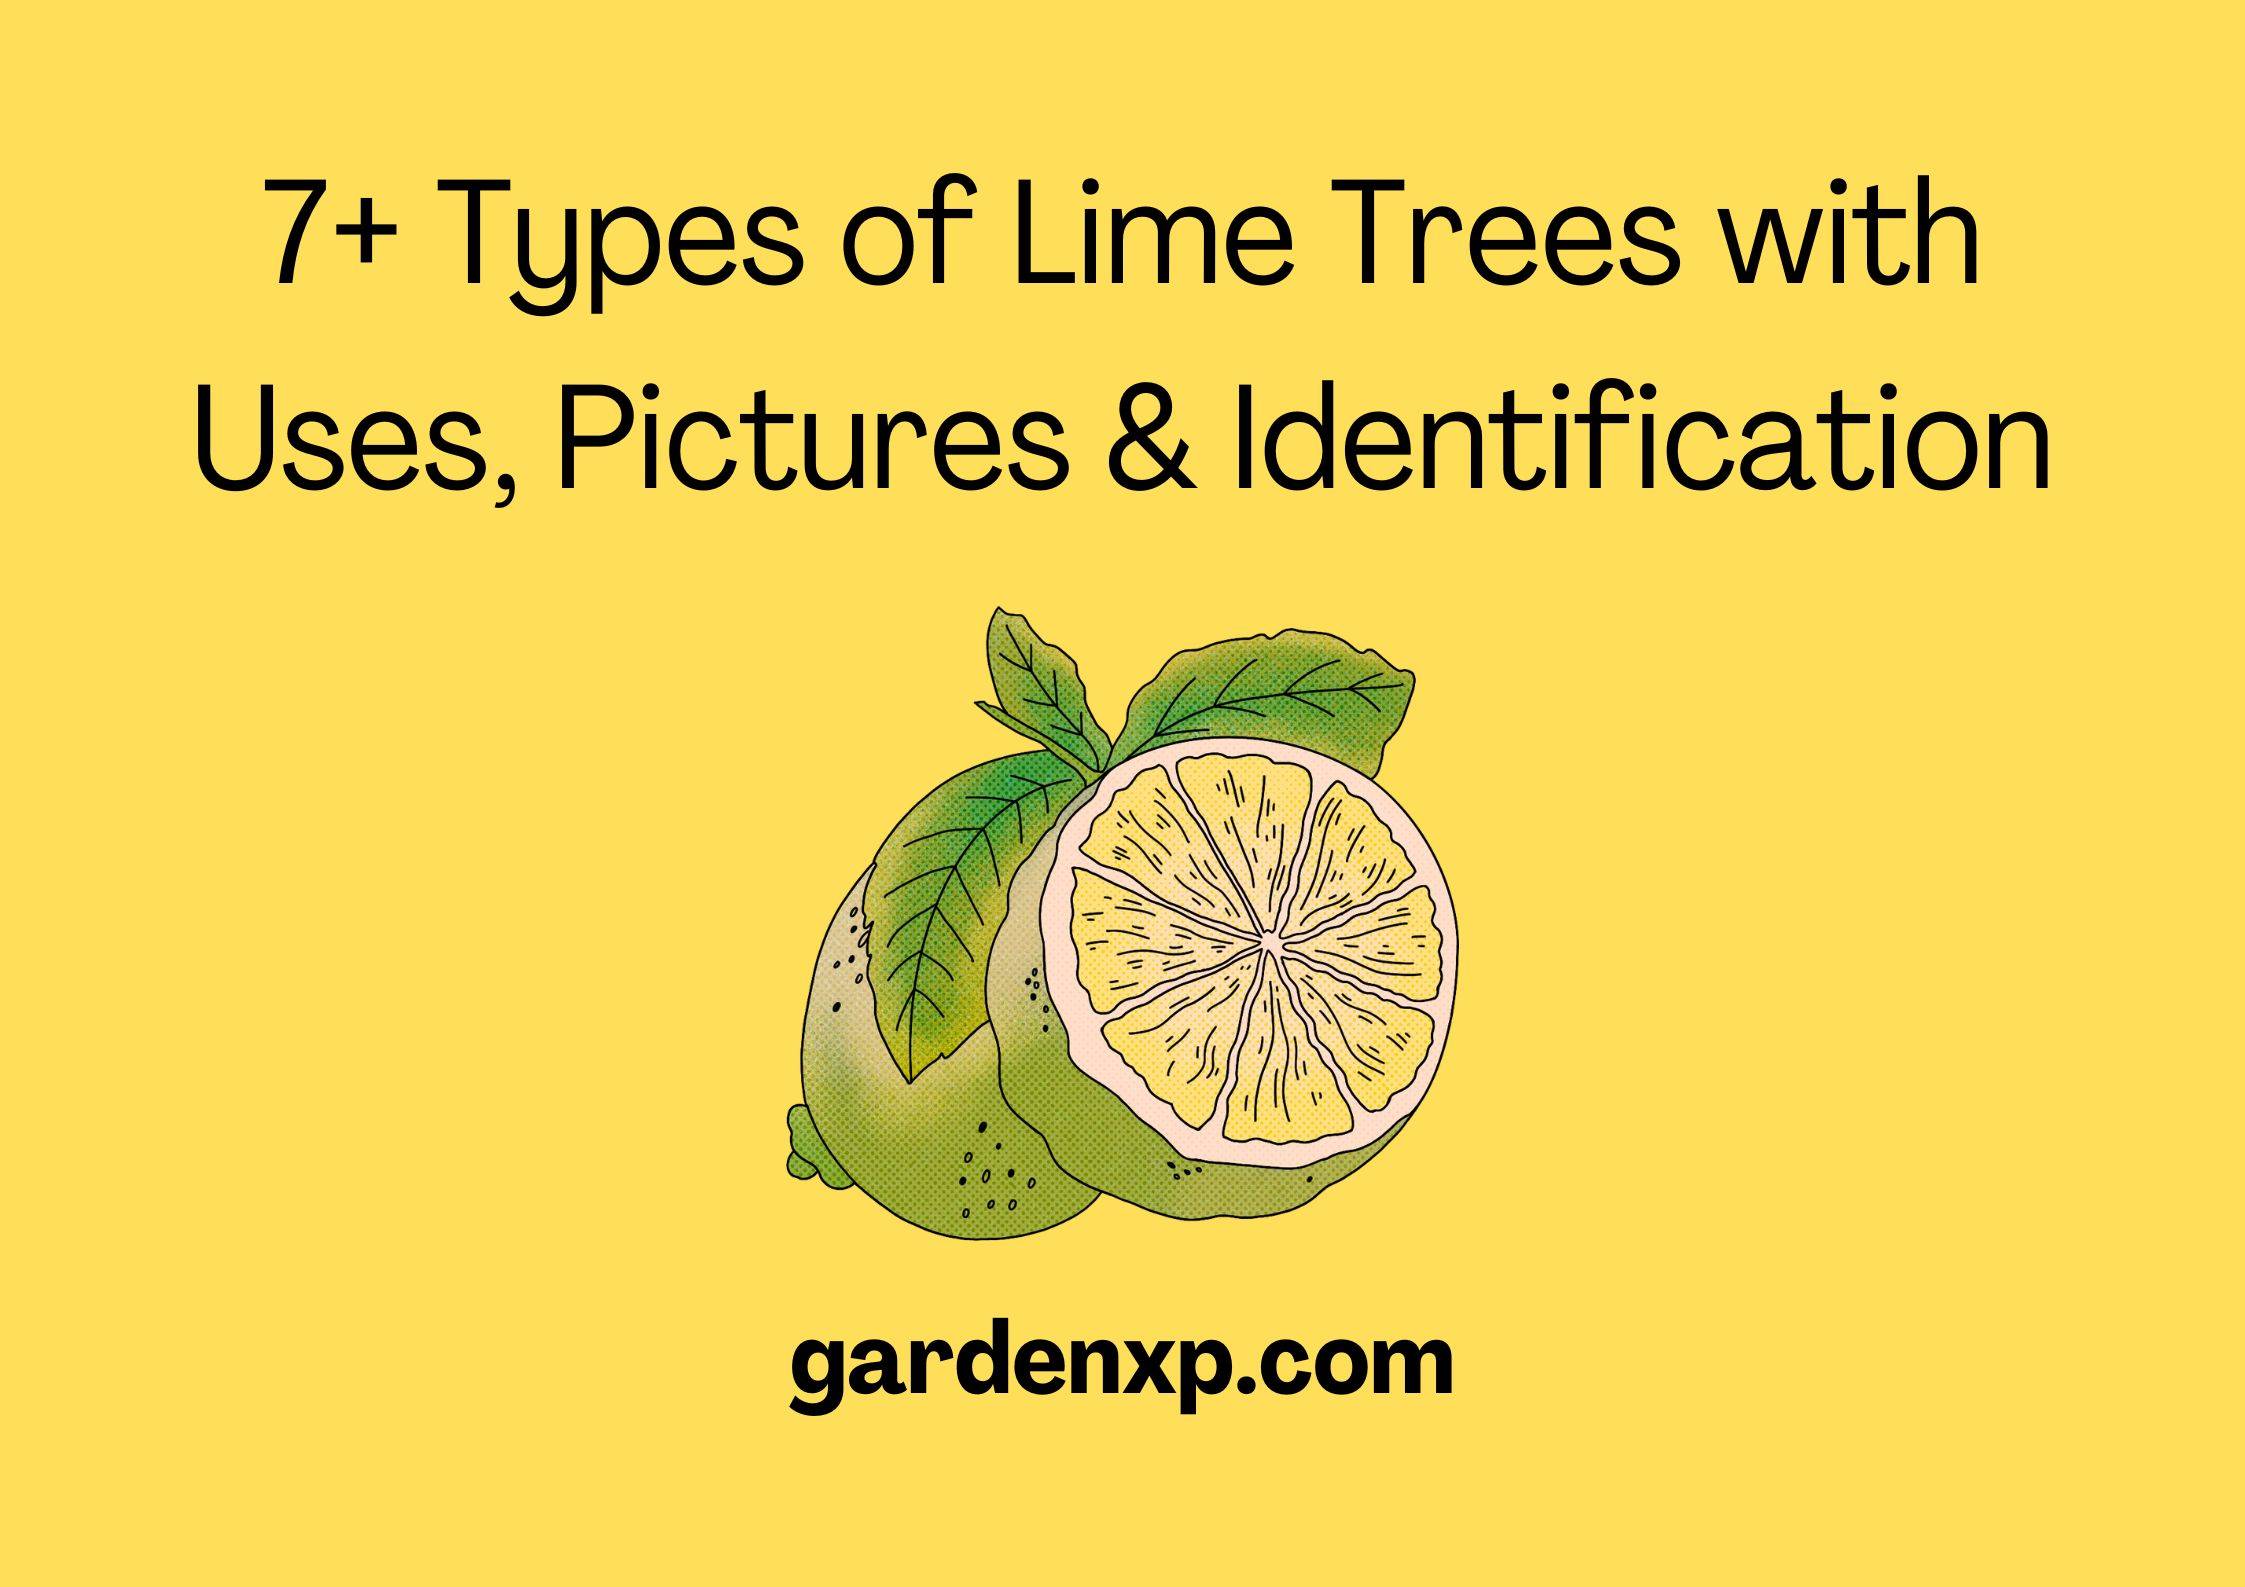 7+ Types of Lime Trees with Uses Pictures & Identification